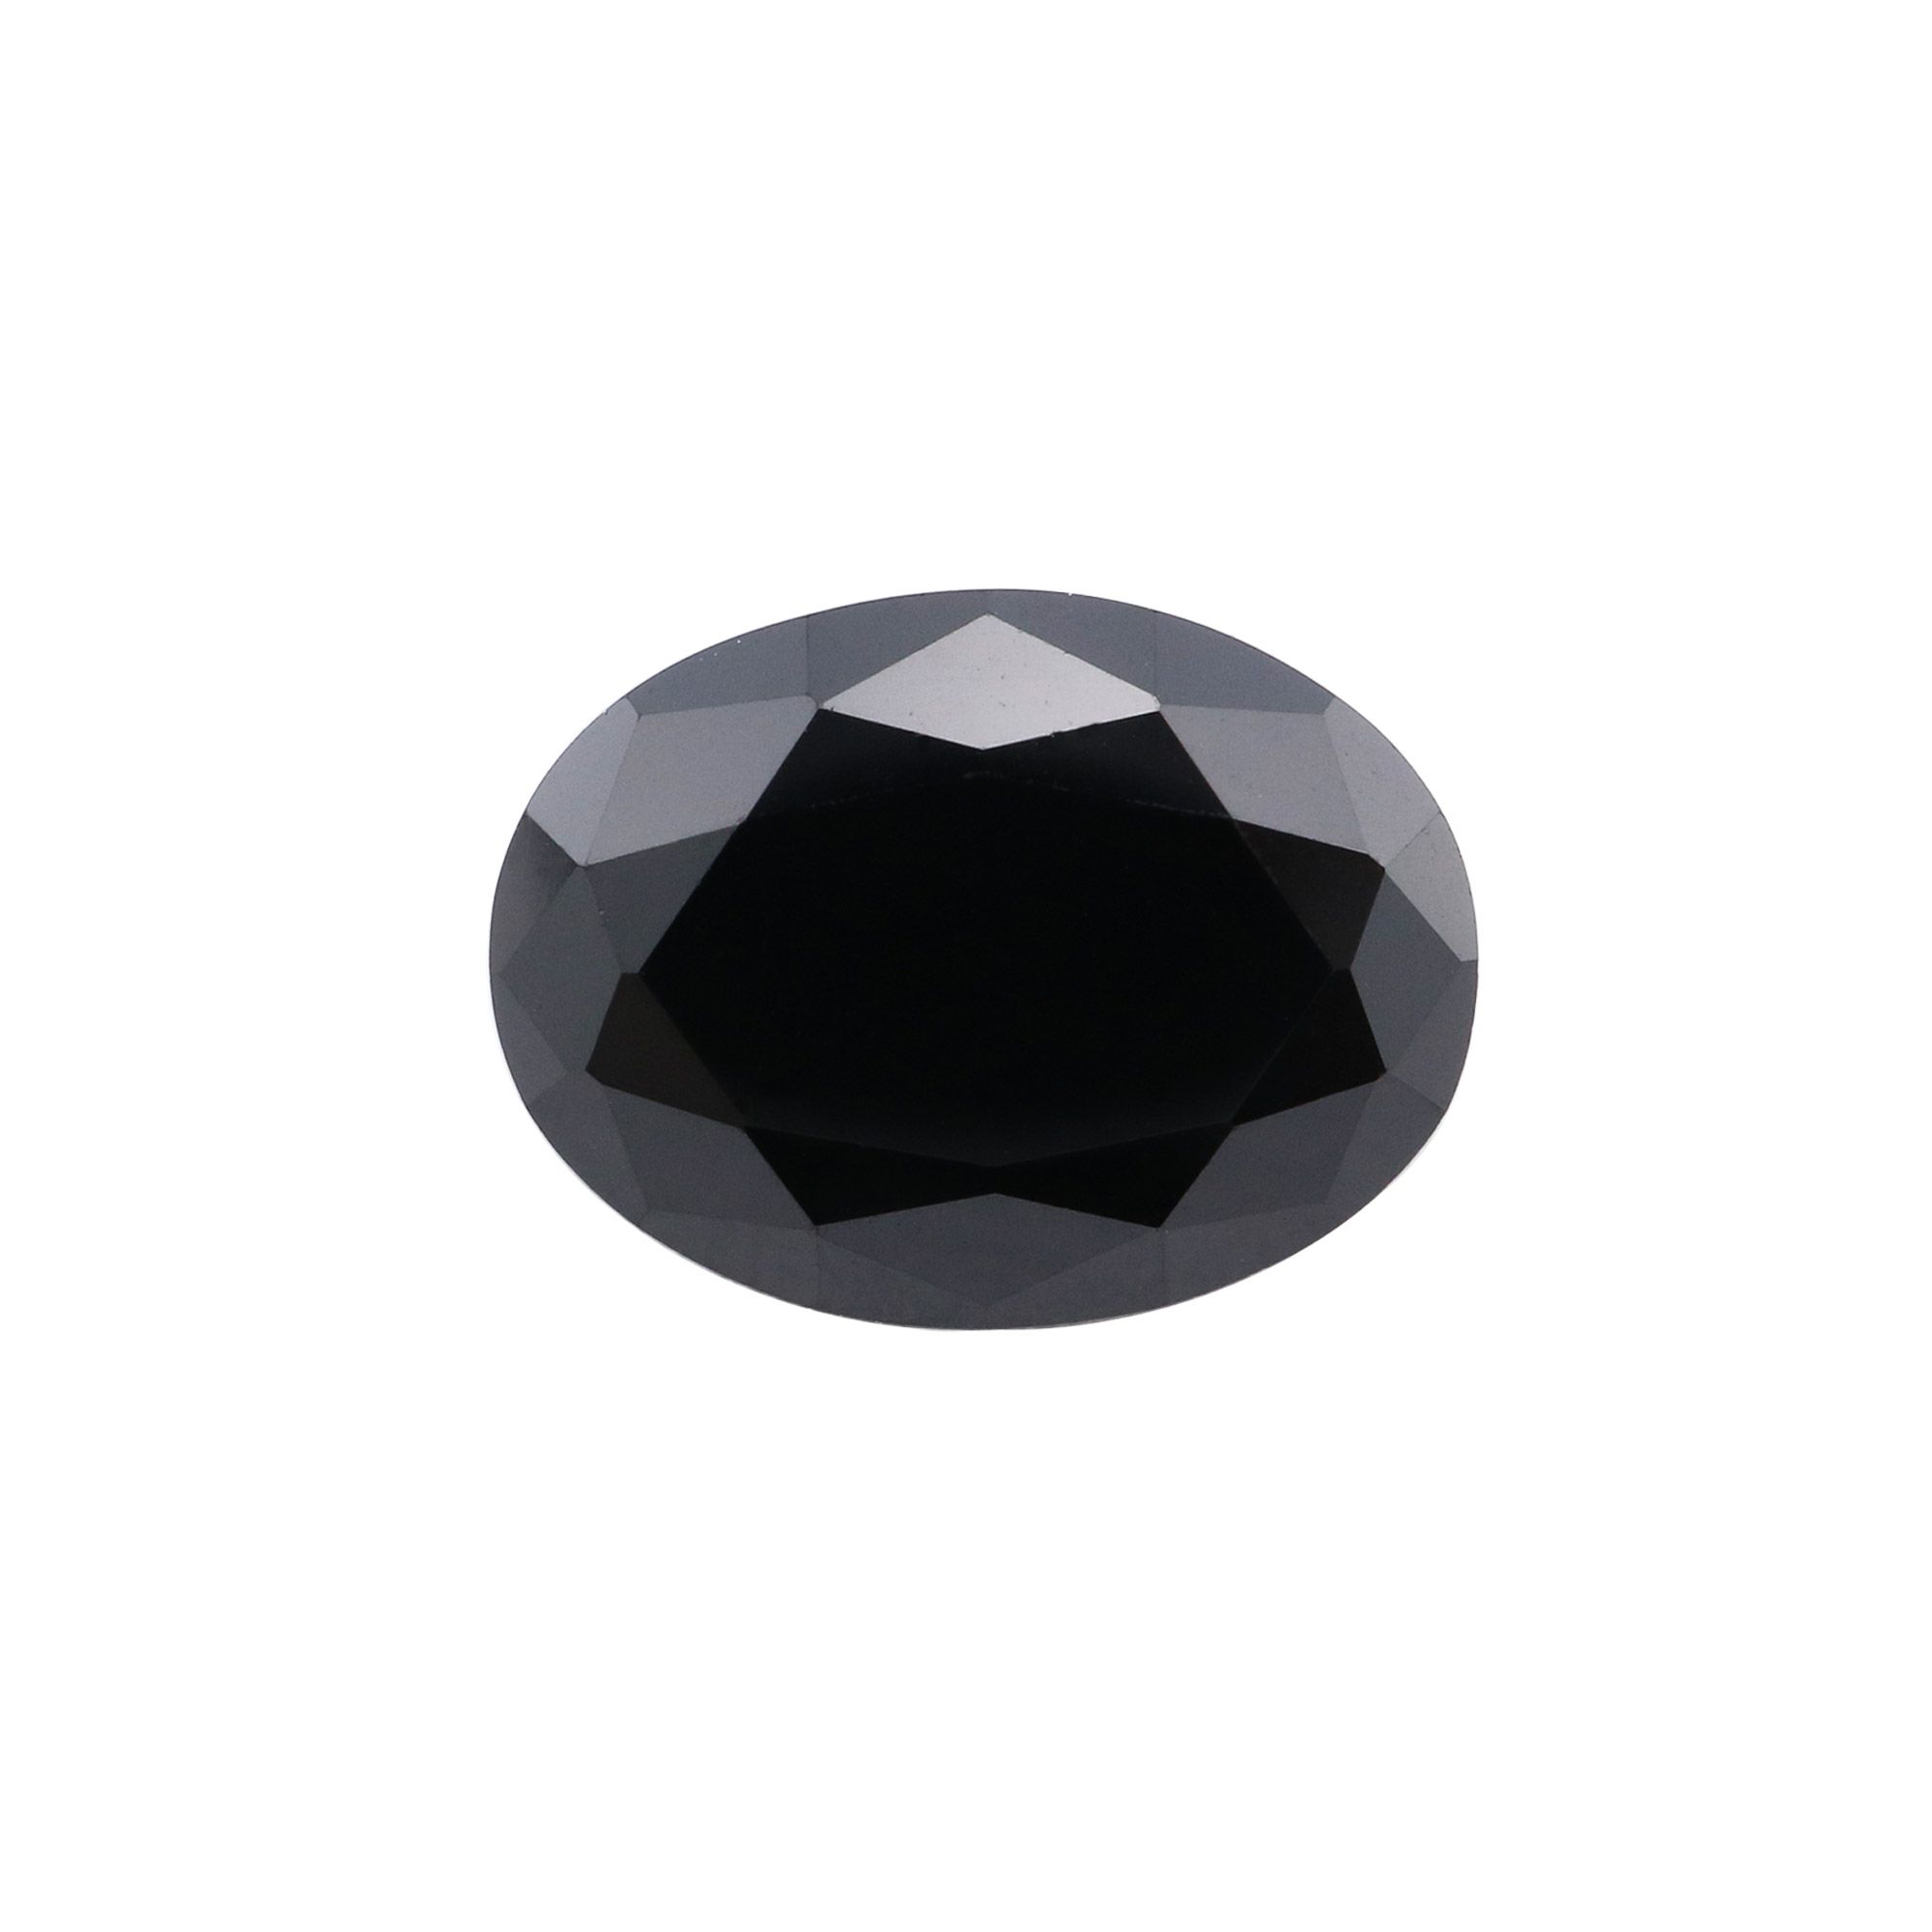 5Pcs Oval Black Spinel Faceted Cut Loose Gemstone Natural Semi Precious Stone DIY Jewelry Supplies 4120125 - Click Image to Close